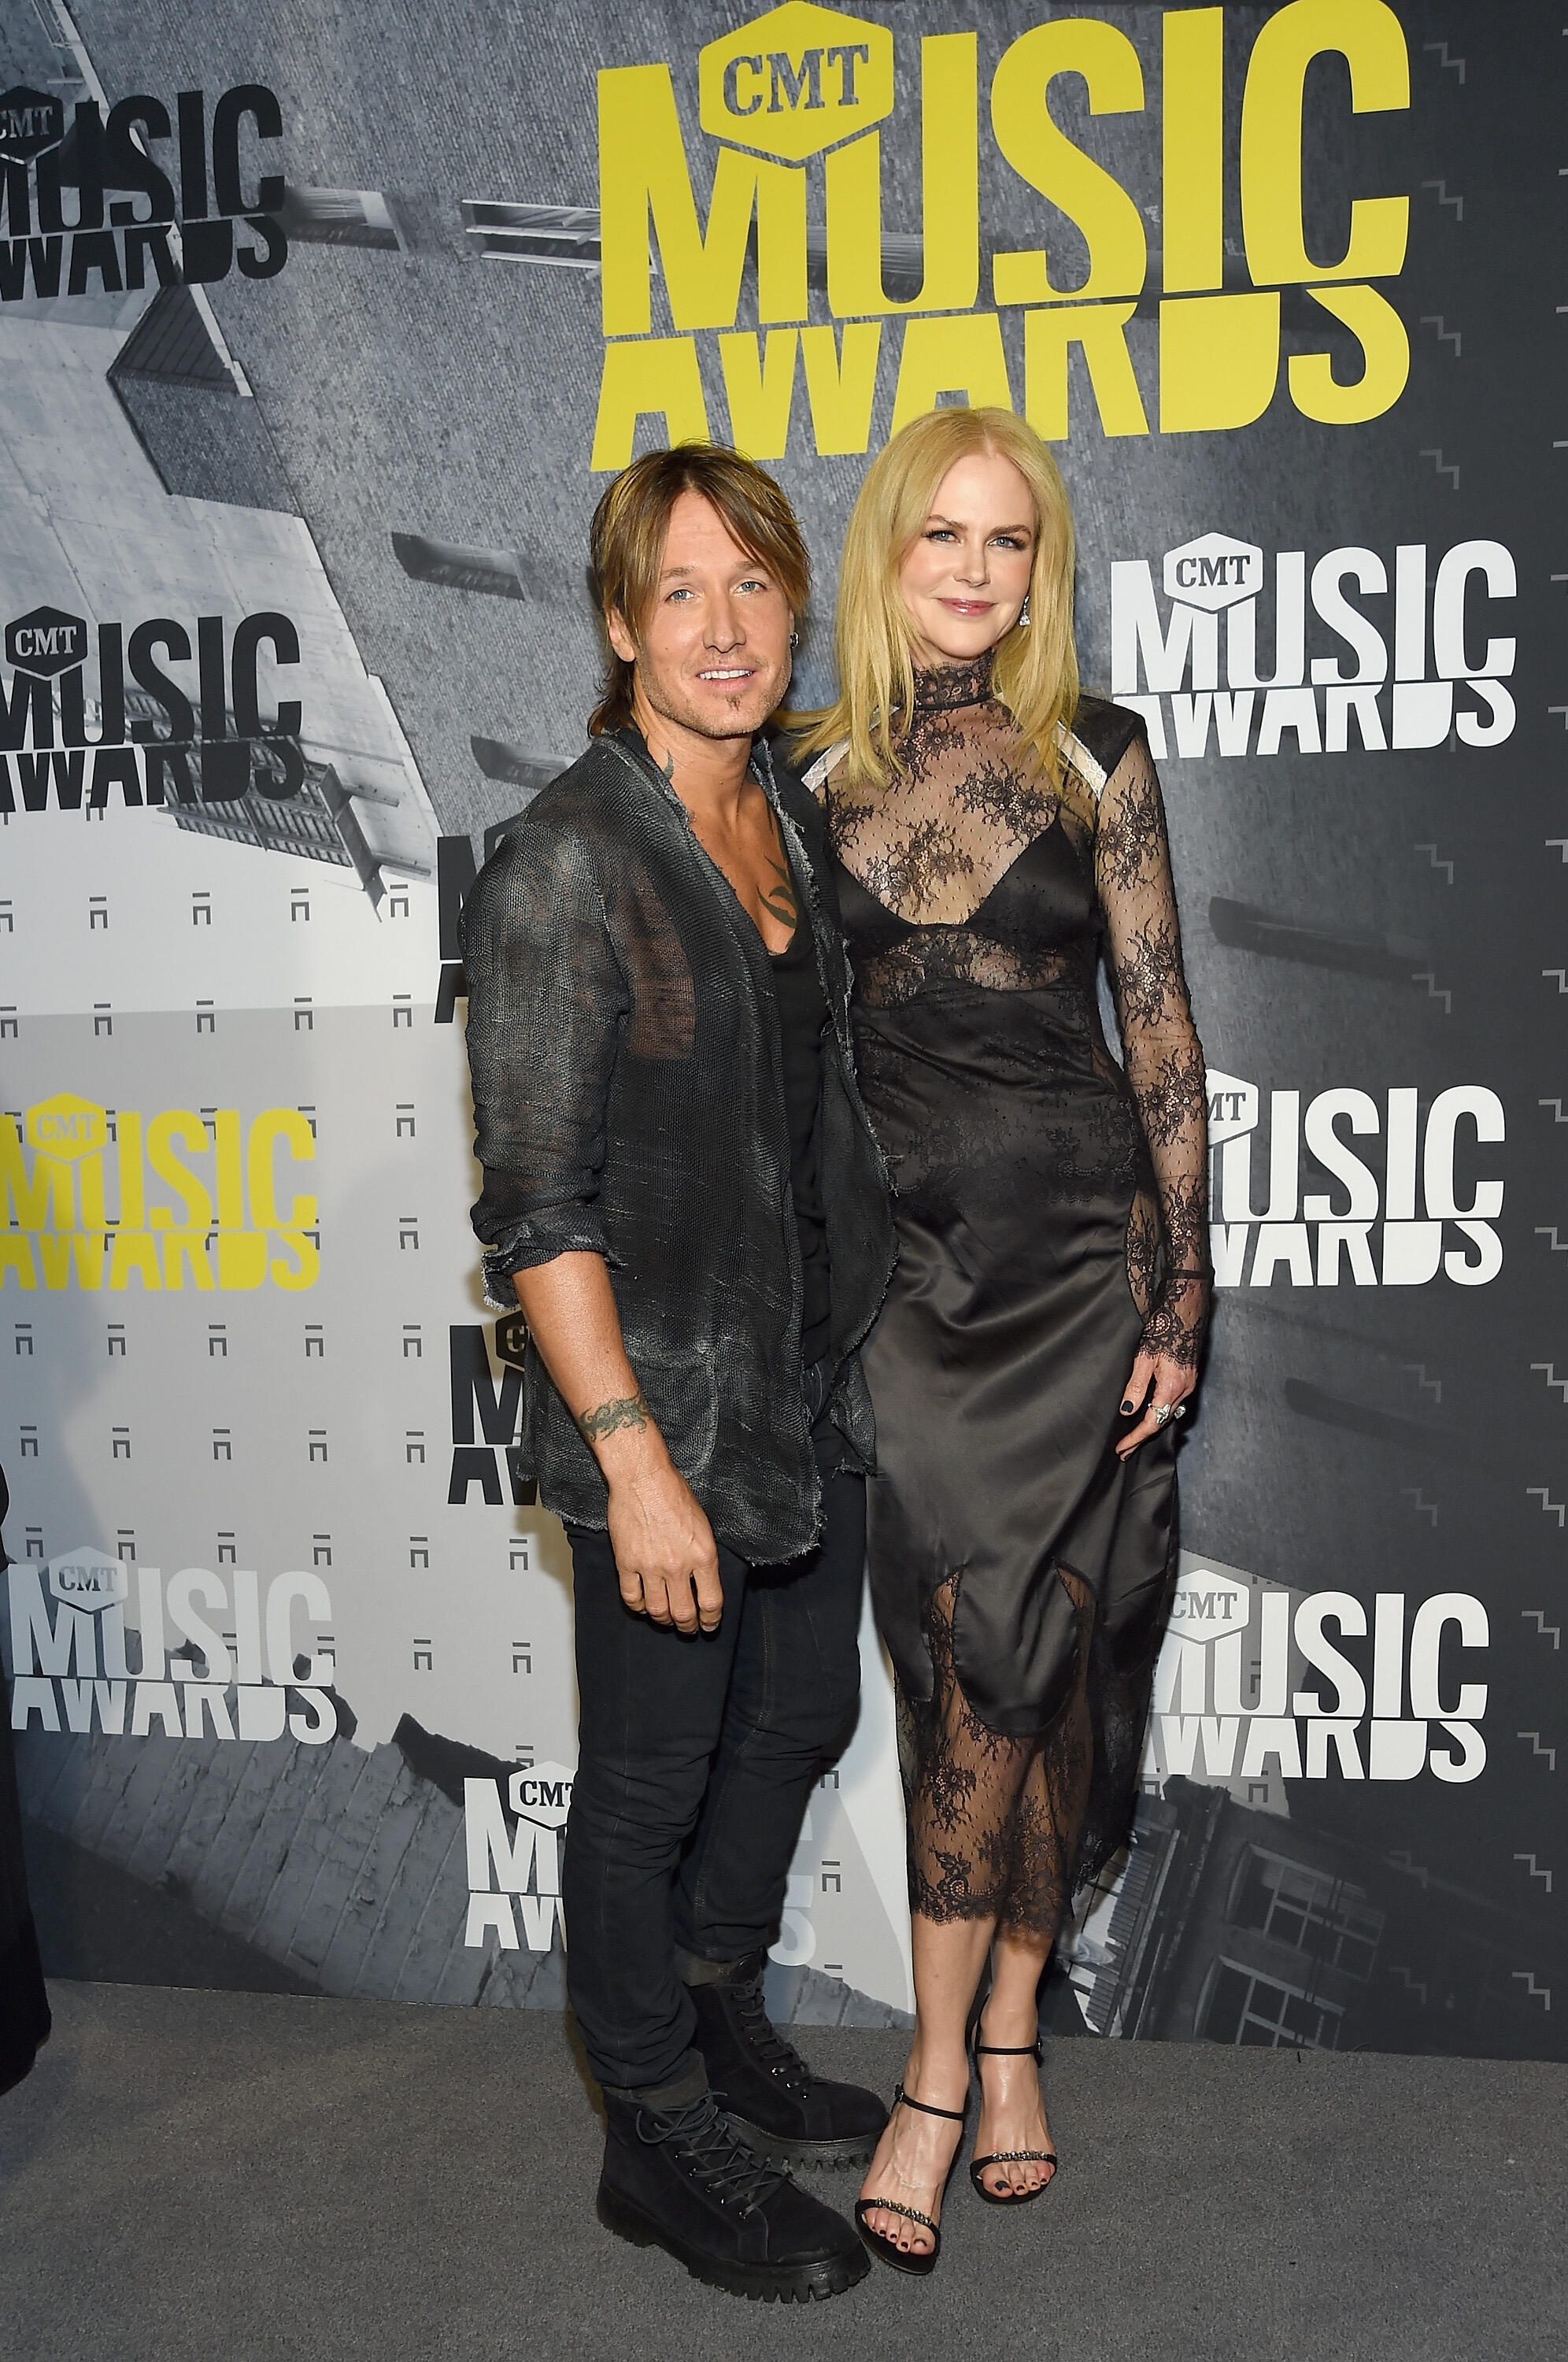 NASHVILLE, TN - JUNE 07:  Musician Keith Urban and actress Nicole Kidman attend the 2017 CMT Music awards at the Music City Center on June 7, 2017 in Nashville, Tennessee.  (Photo by Rick Diamond/Getty Images for CMT)